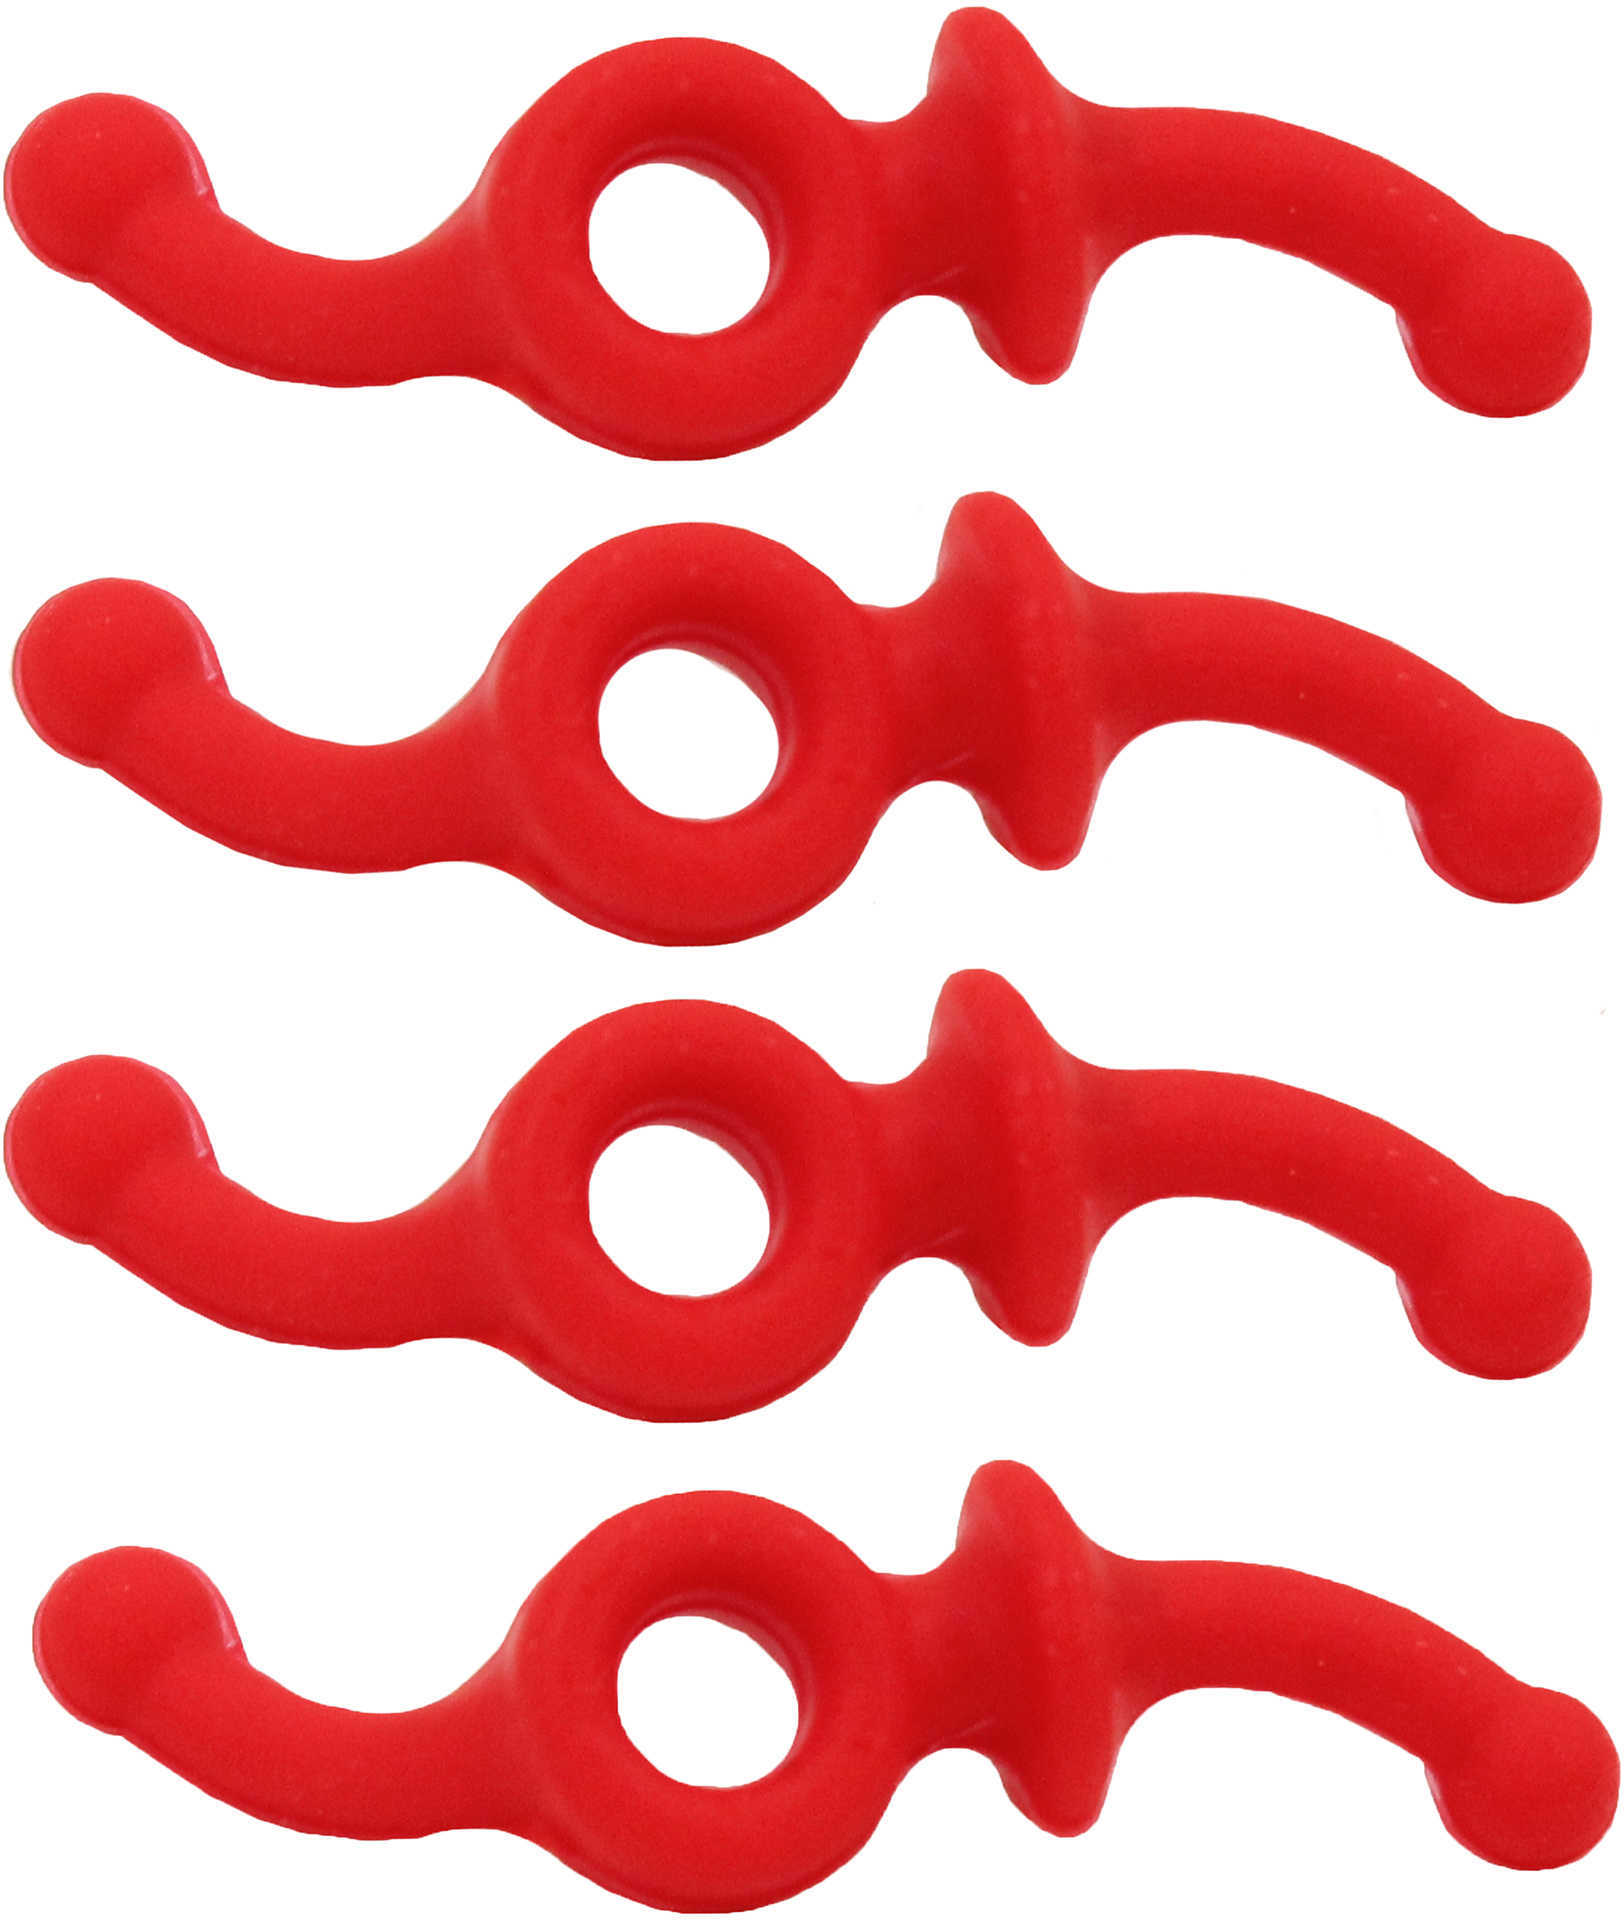 Apex Doubledown Silencers 4-Pack Red